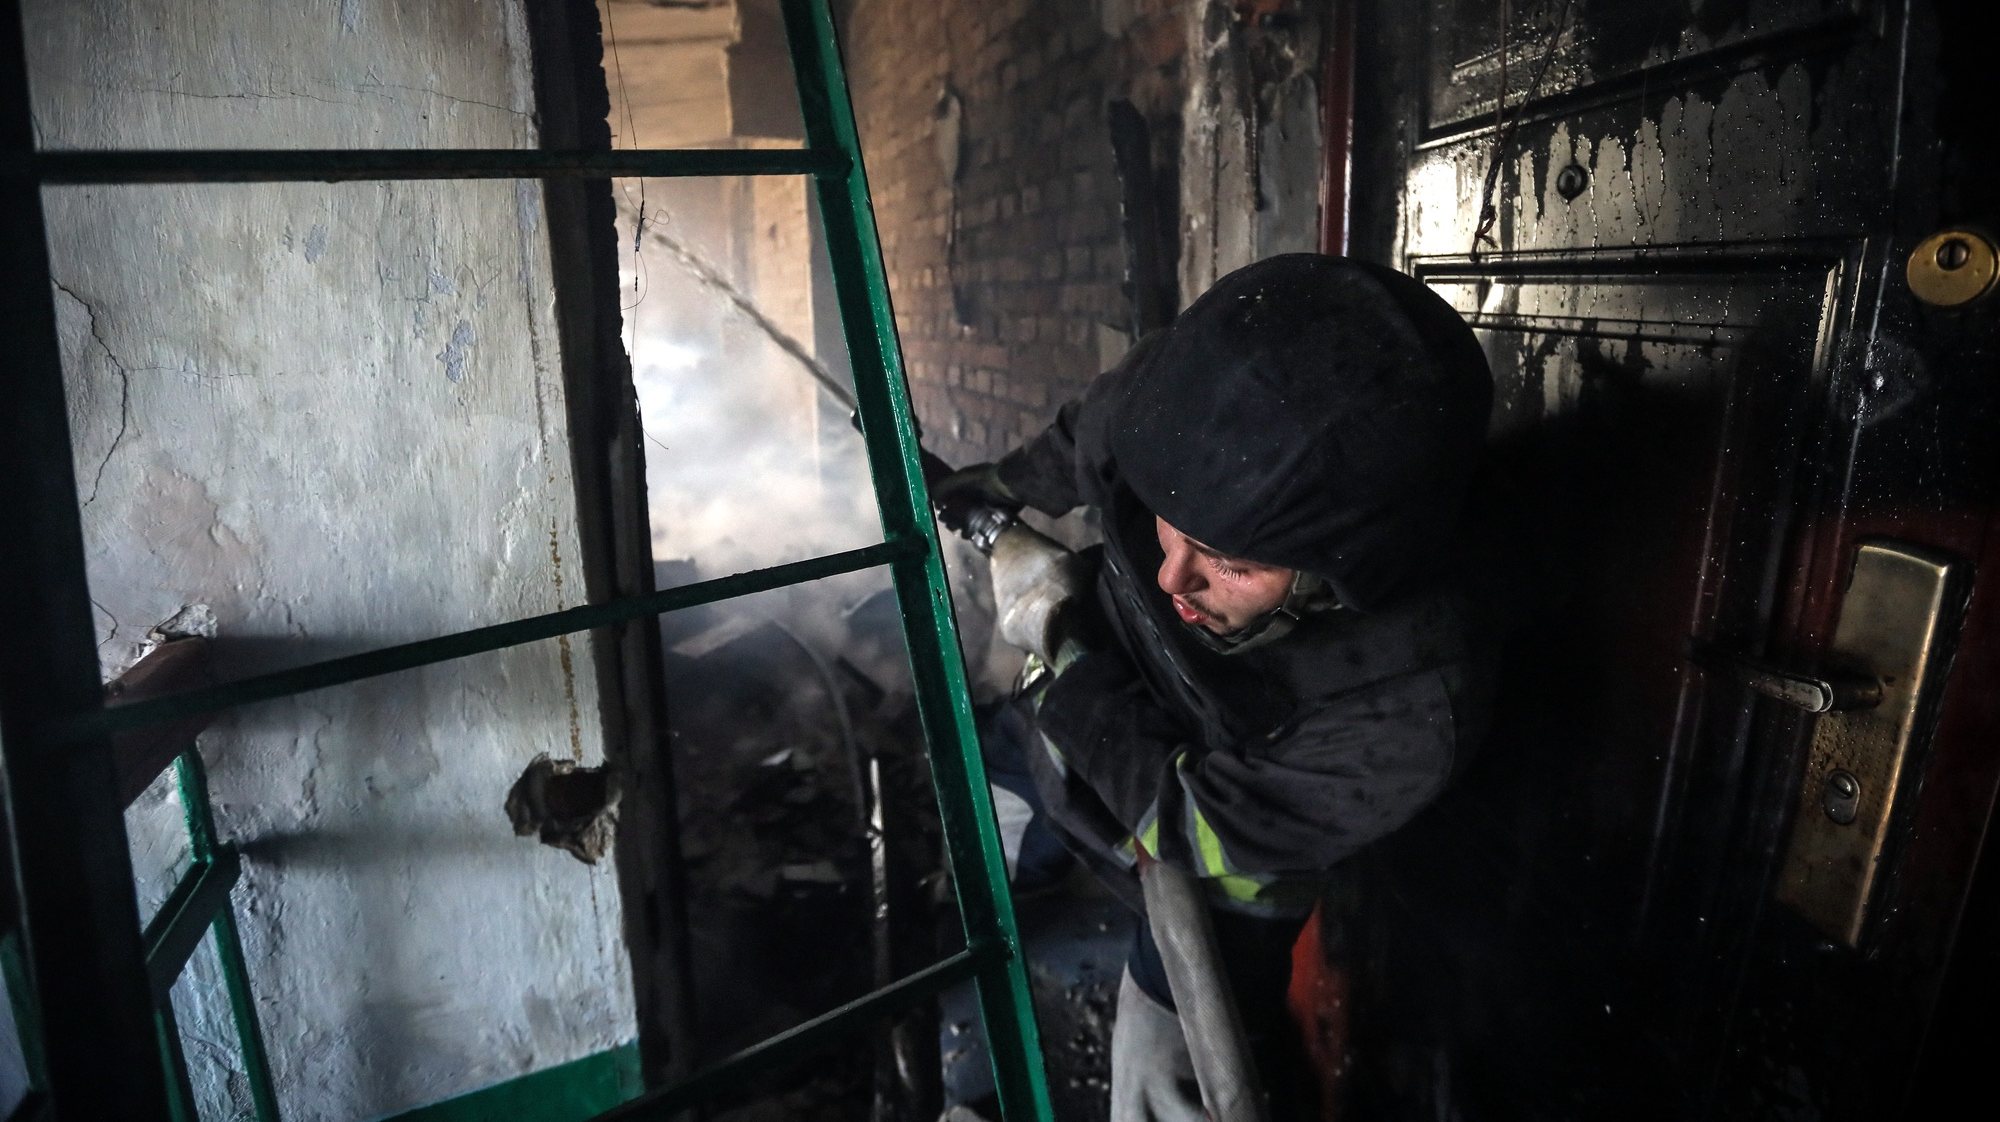 epa10755982 A Ukrainian firefighter works at an apartment block damaged by a fire following an artillery shelling, in Siversk town, in Donetsk region, 19 July 2023. The war in Ukraine, which started when Russia entered the country in February 2022, marked in July its 500th day. According to the UN, since the conflict started, more than 9000 civilians have been killed and more than 6 million others are now refugees worldwide.  EPA/OLEG PETRASYUK